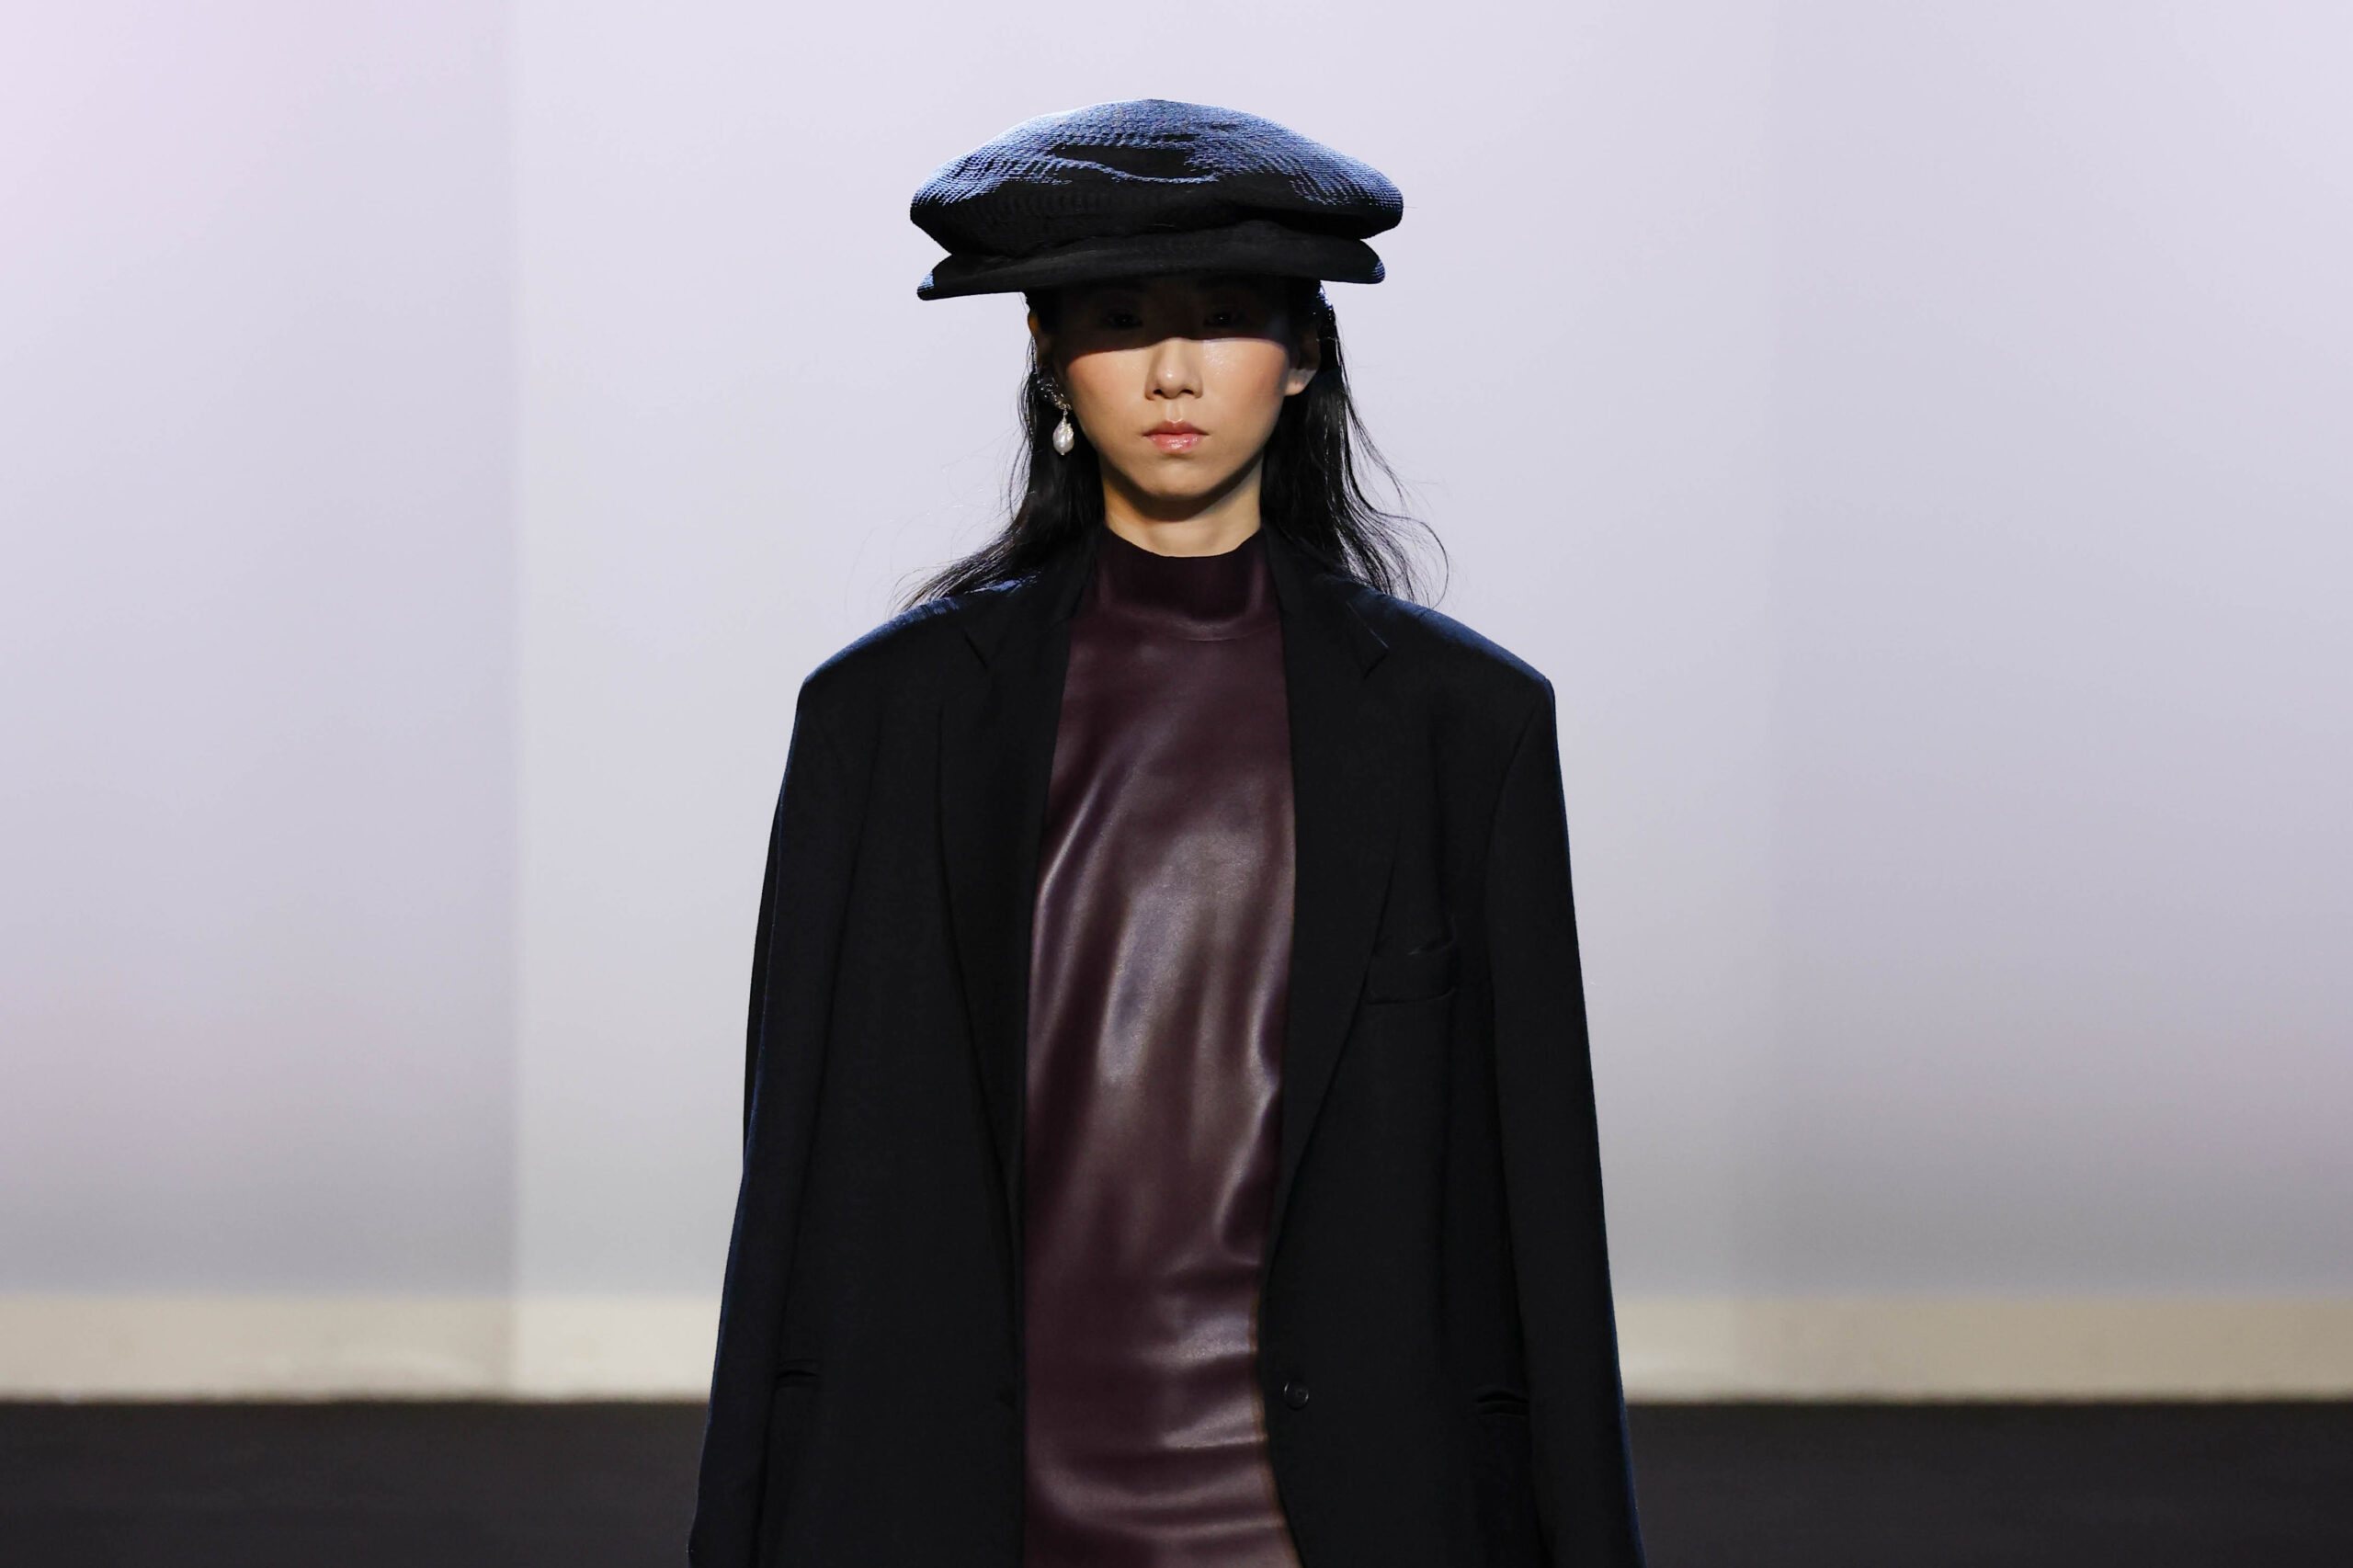 A model at Milan Fashion Week is clad in an Alberto Zambelli 'Nexum' Fall/Winter 2024 collection piece, featuring a sleek maroon turtleneck and a classic black blazer. The ensemble is accessorized with a textured black beret and simple yet elegant pearl earrings, presenting a chic and modern look.